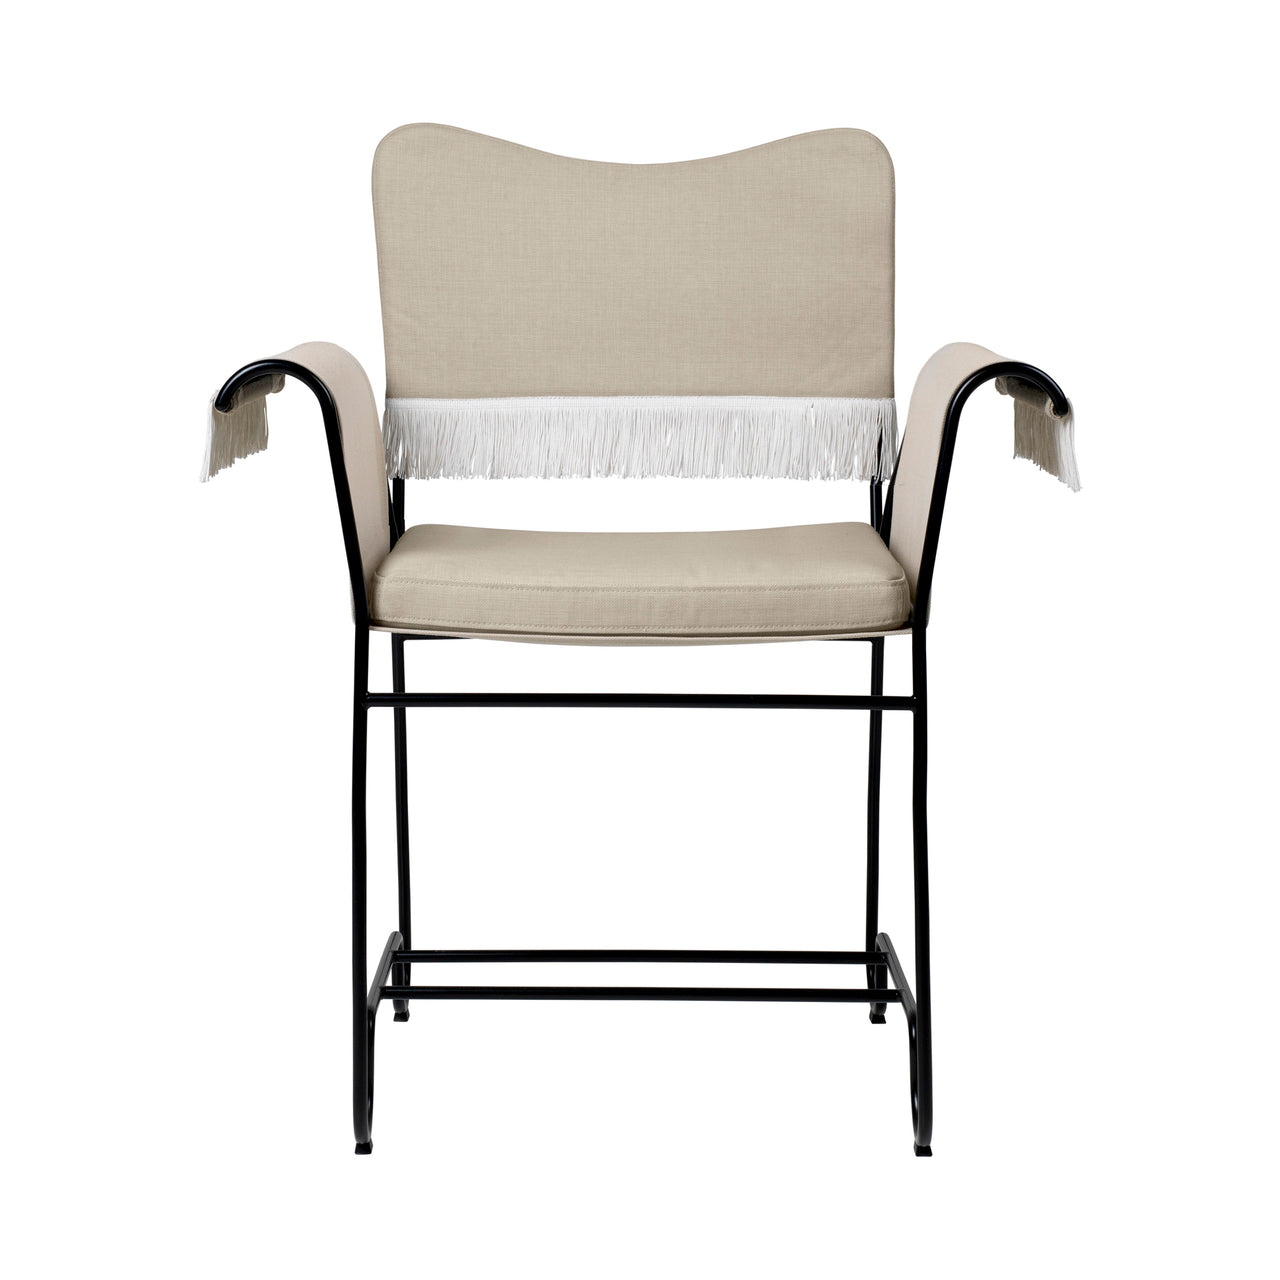 Tropique Dining Chair: Outdoor + With Fringes + Black + Leslie 12